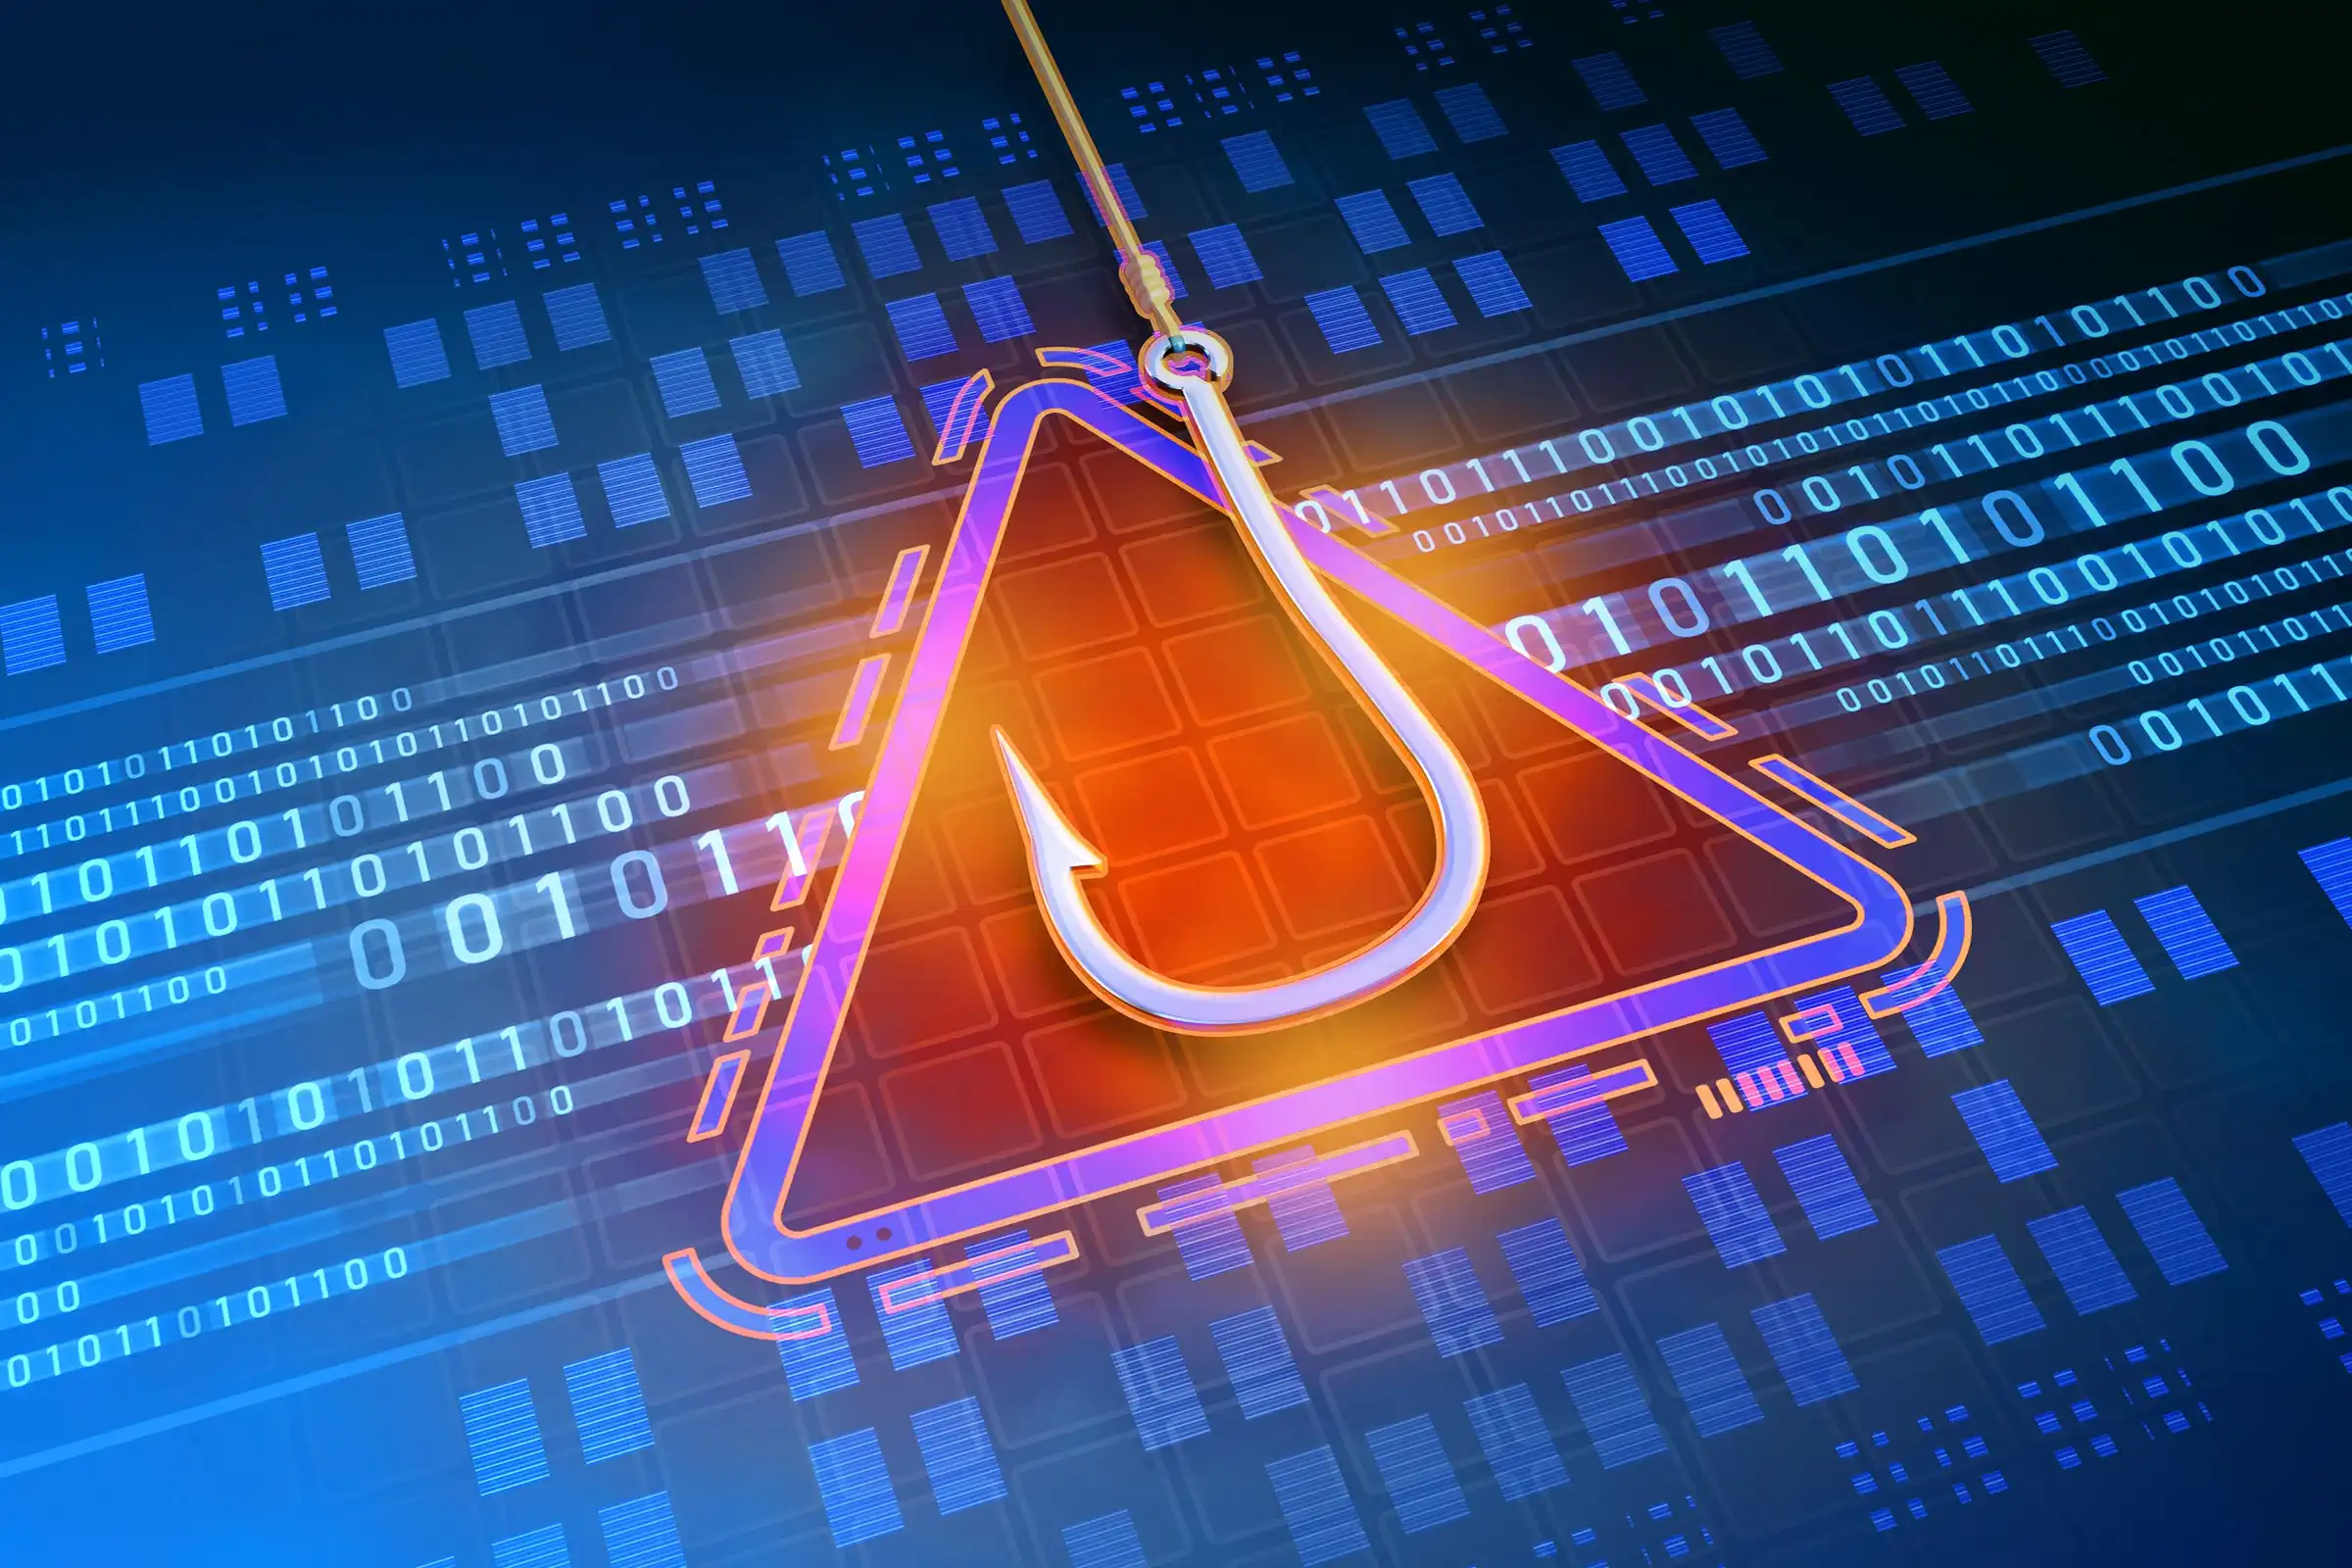 Phishing remains dominant and fastest-growing cybercrime